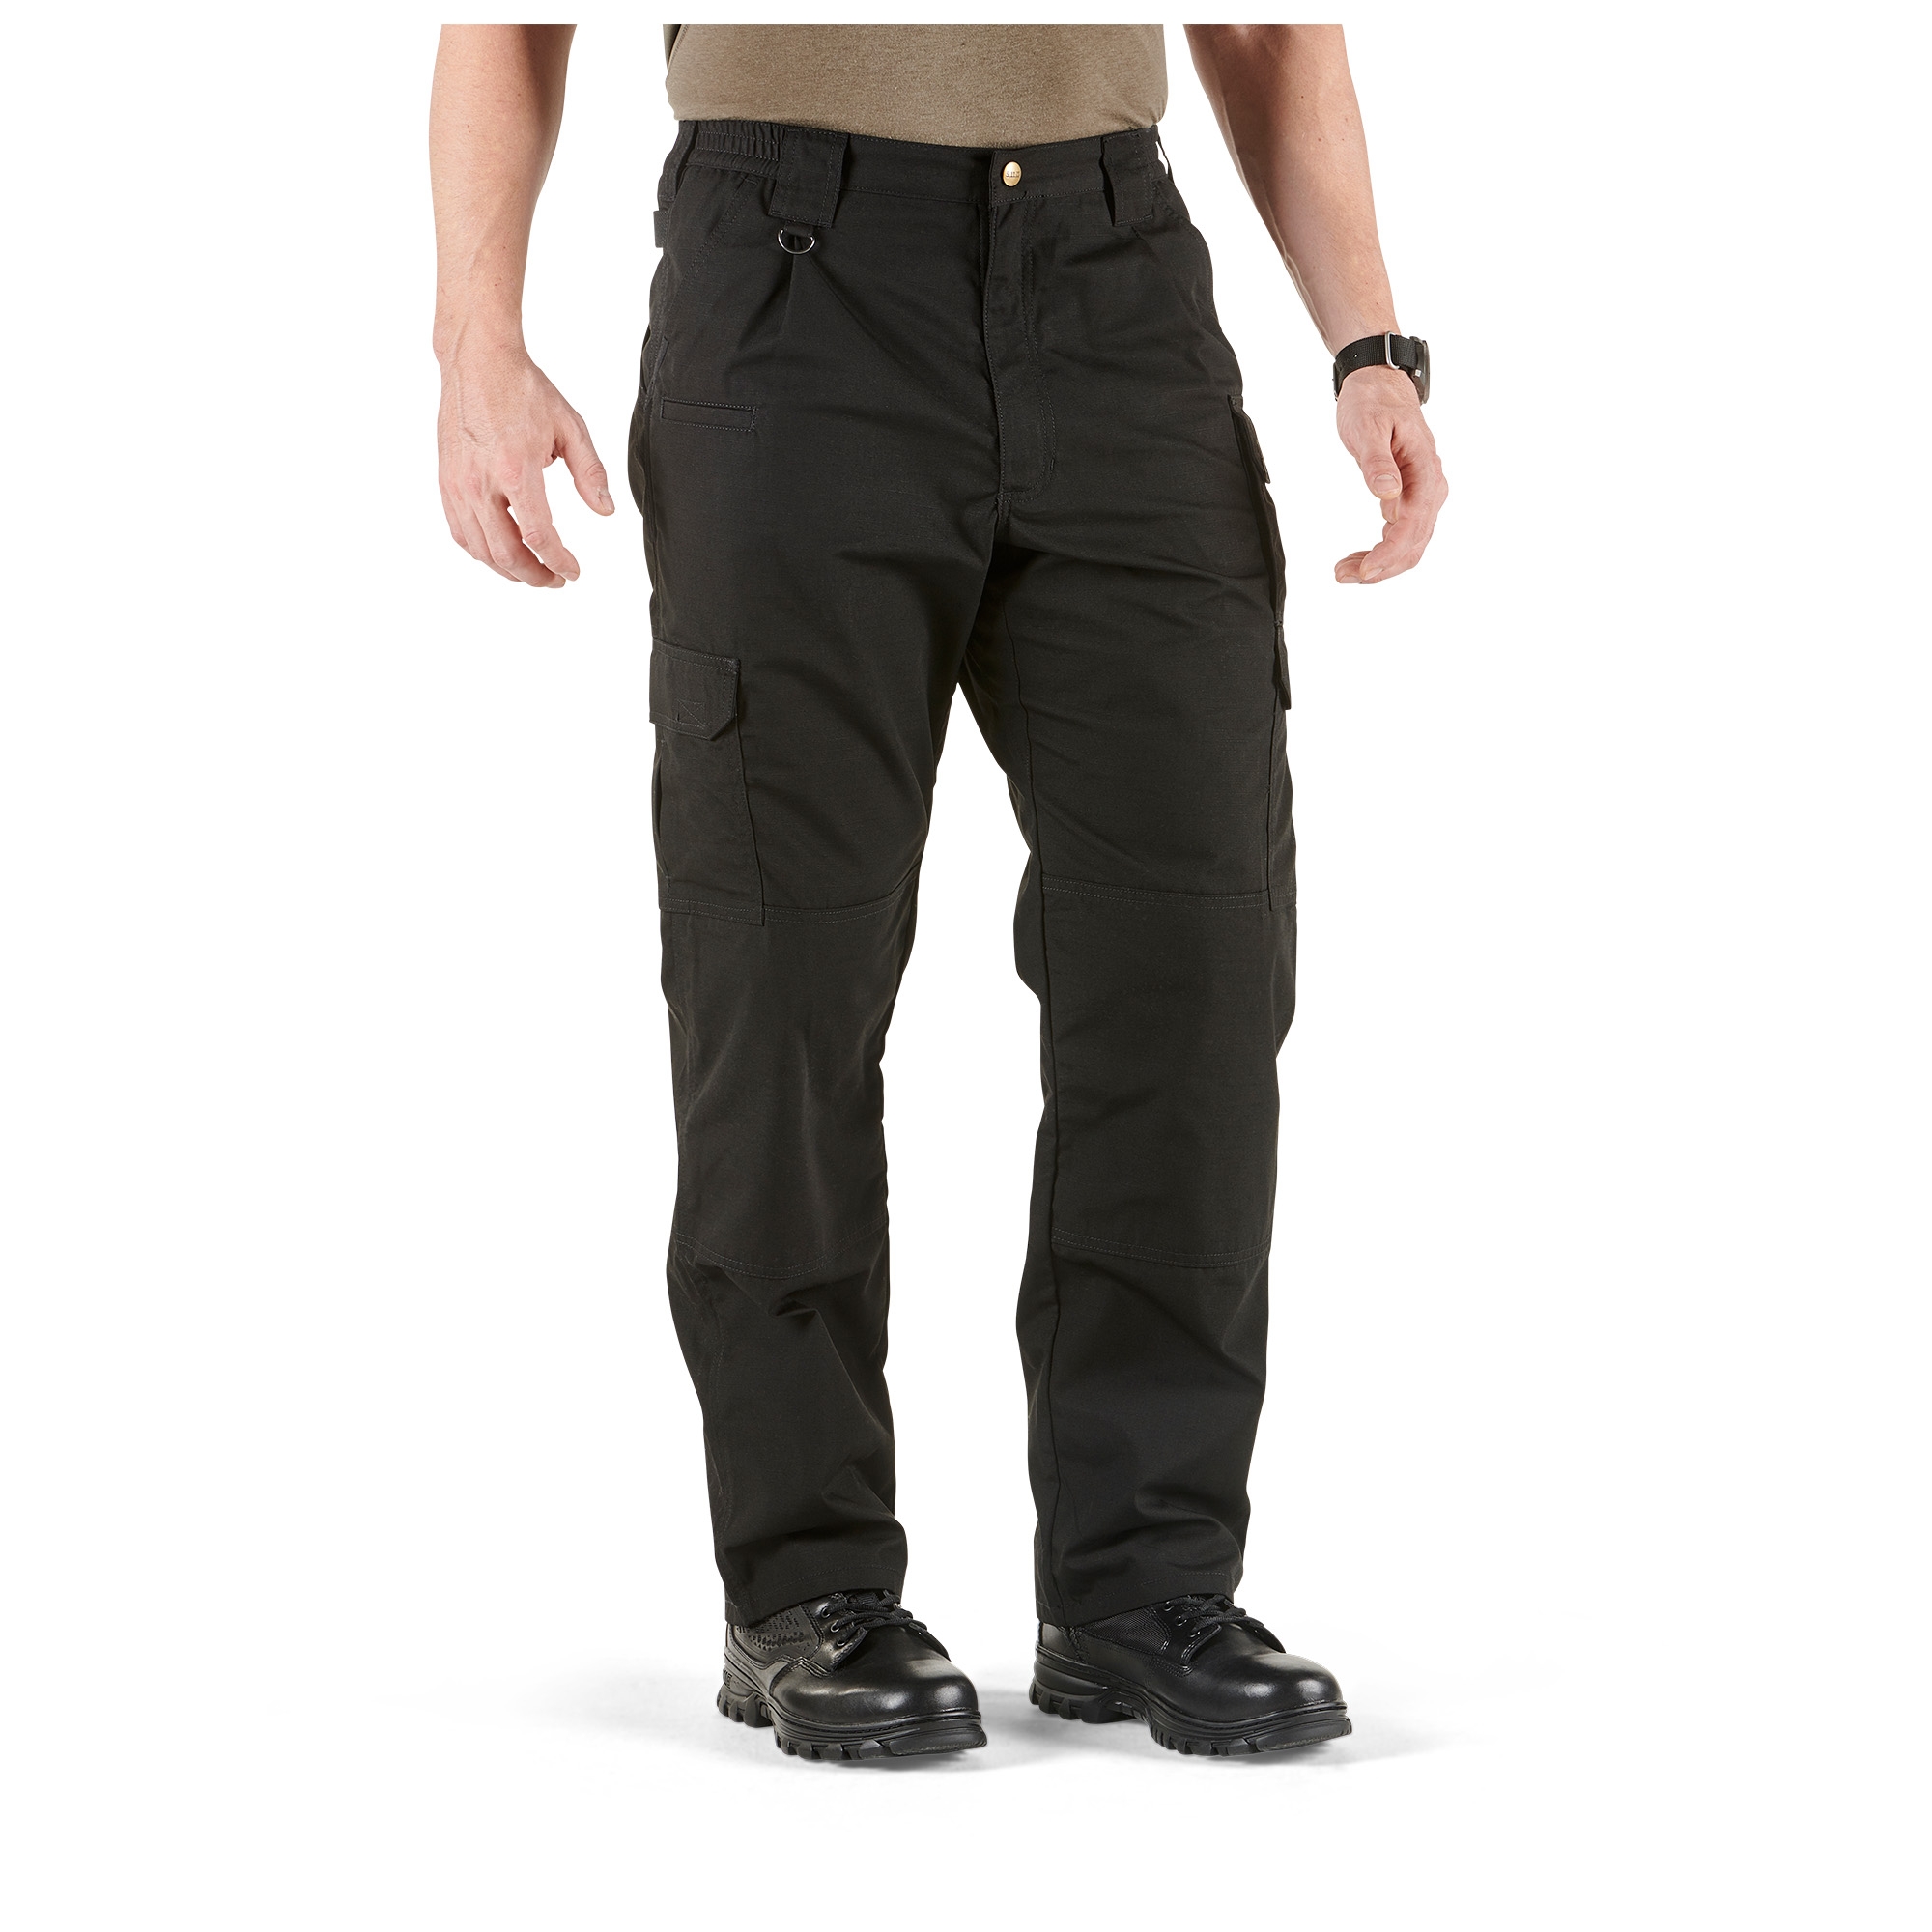 Mens trousers Taclite Pro RipStop Cargo Pants 511 Black 4232  Armed